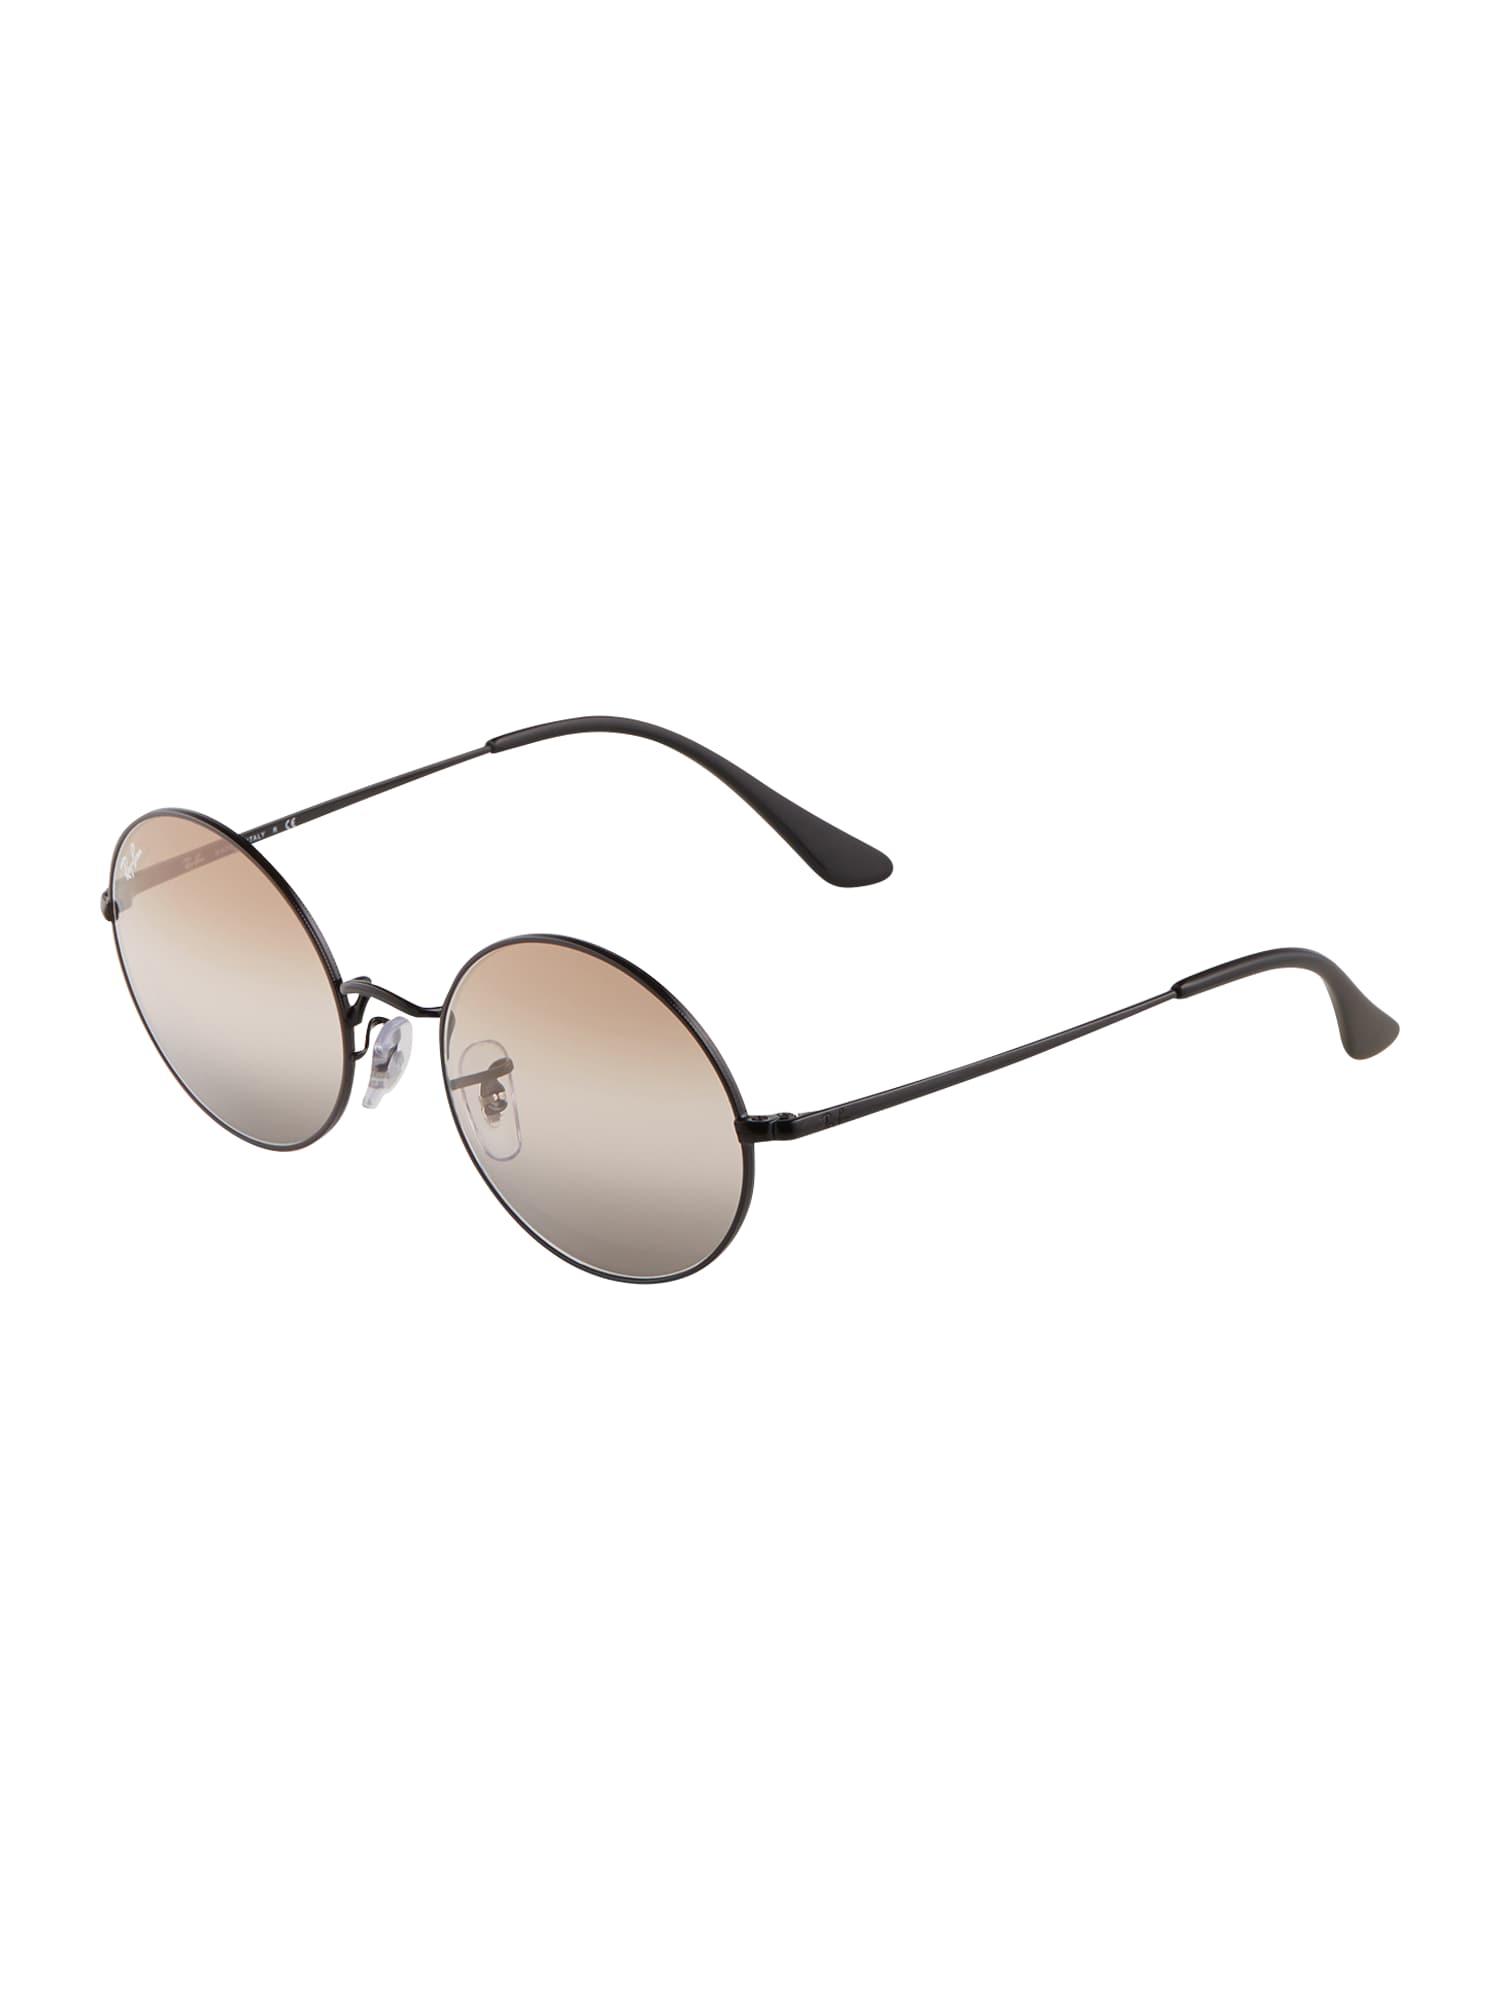 Ray-Ban Saulesbrilles '0RB1970' zils / melns